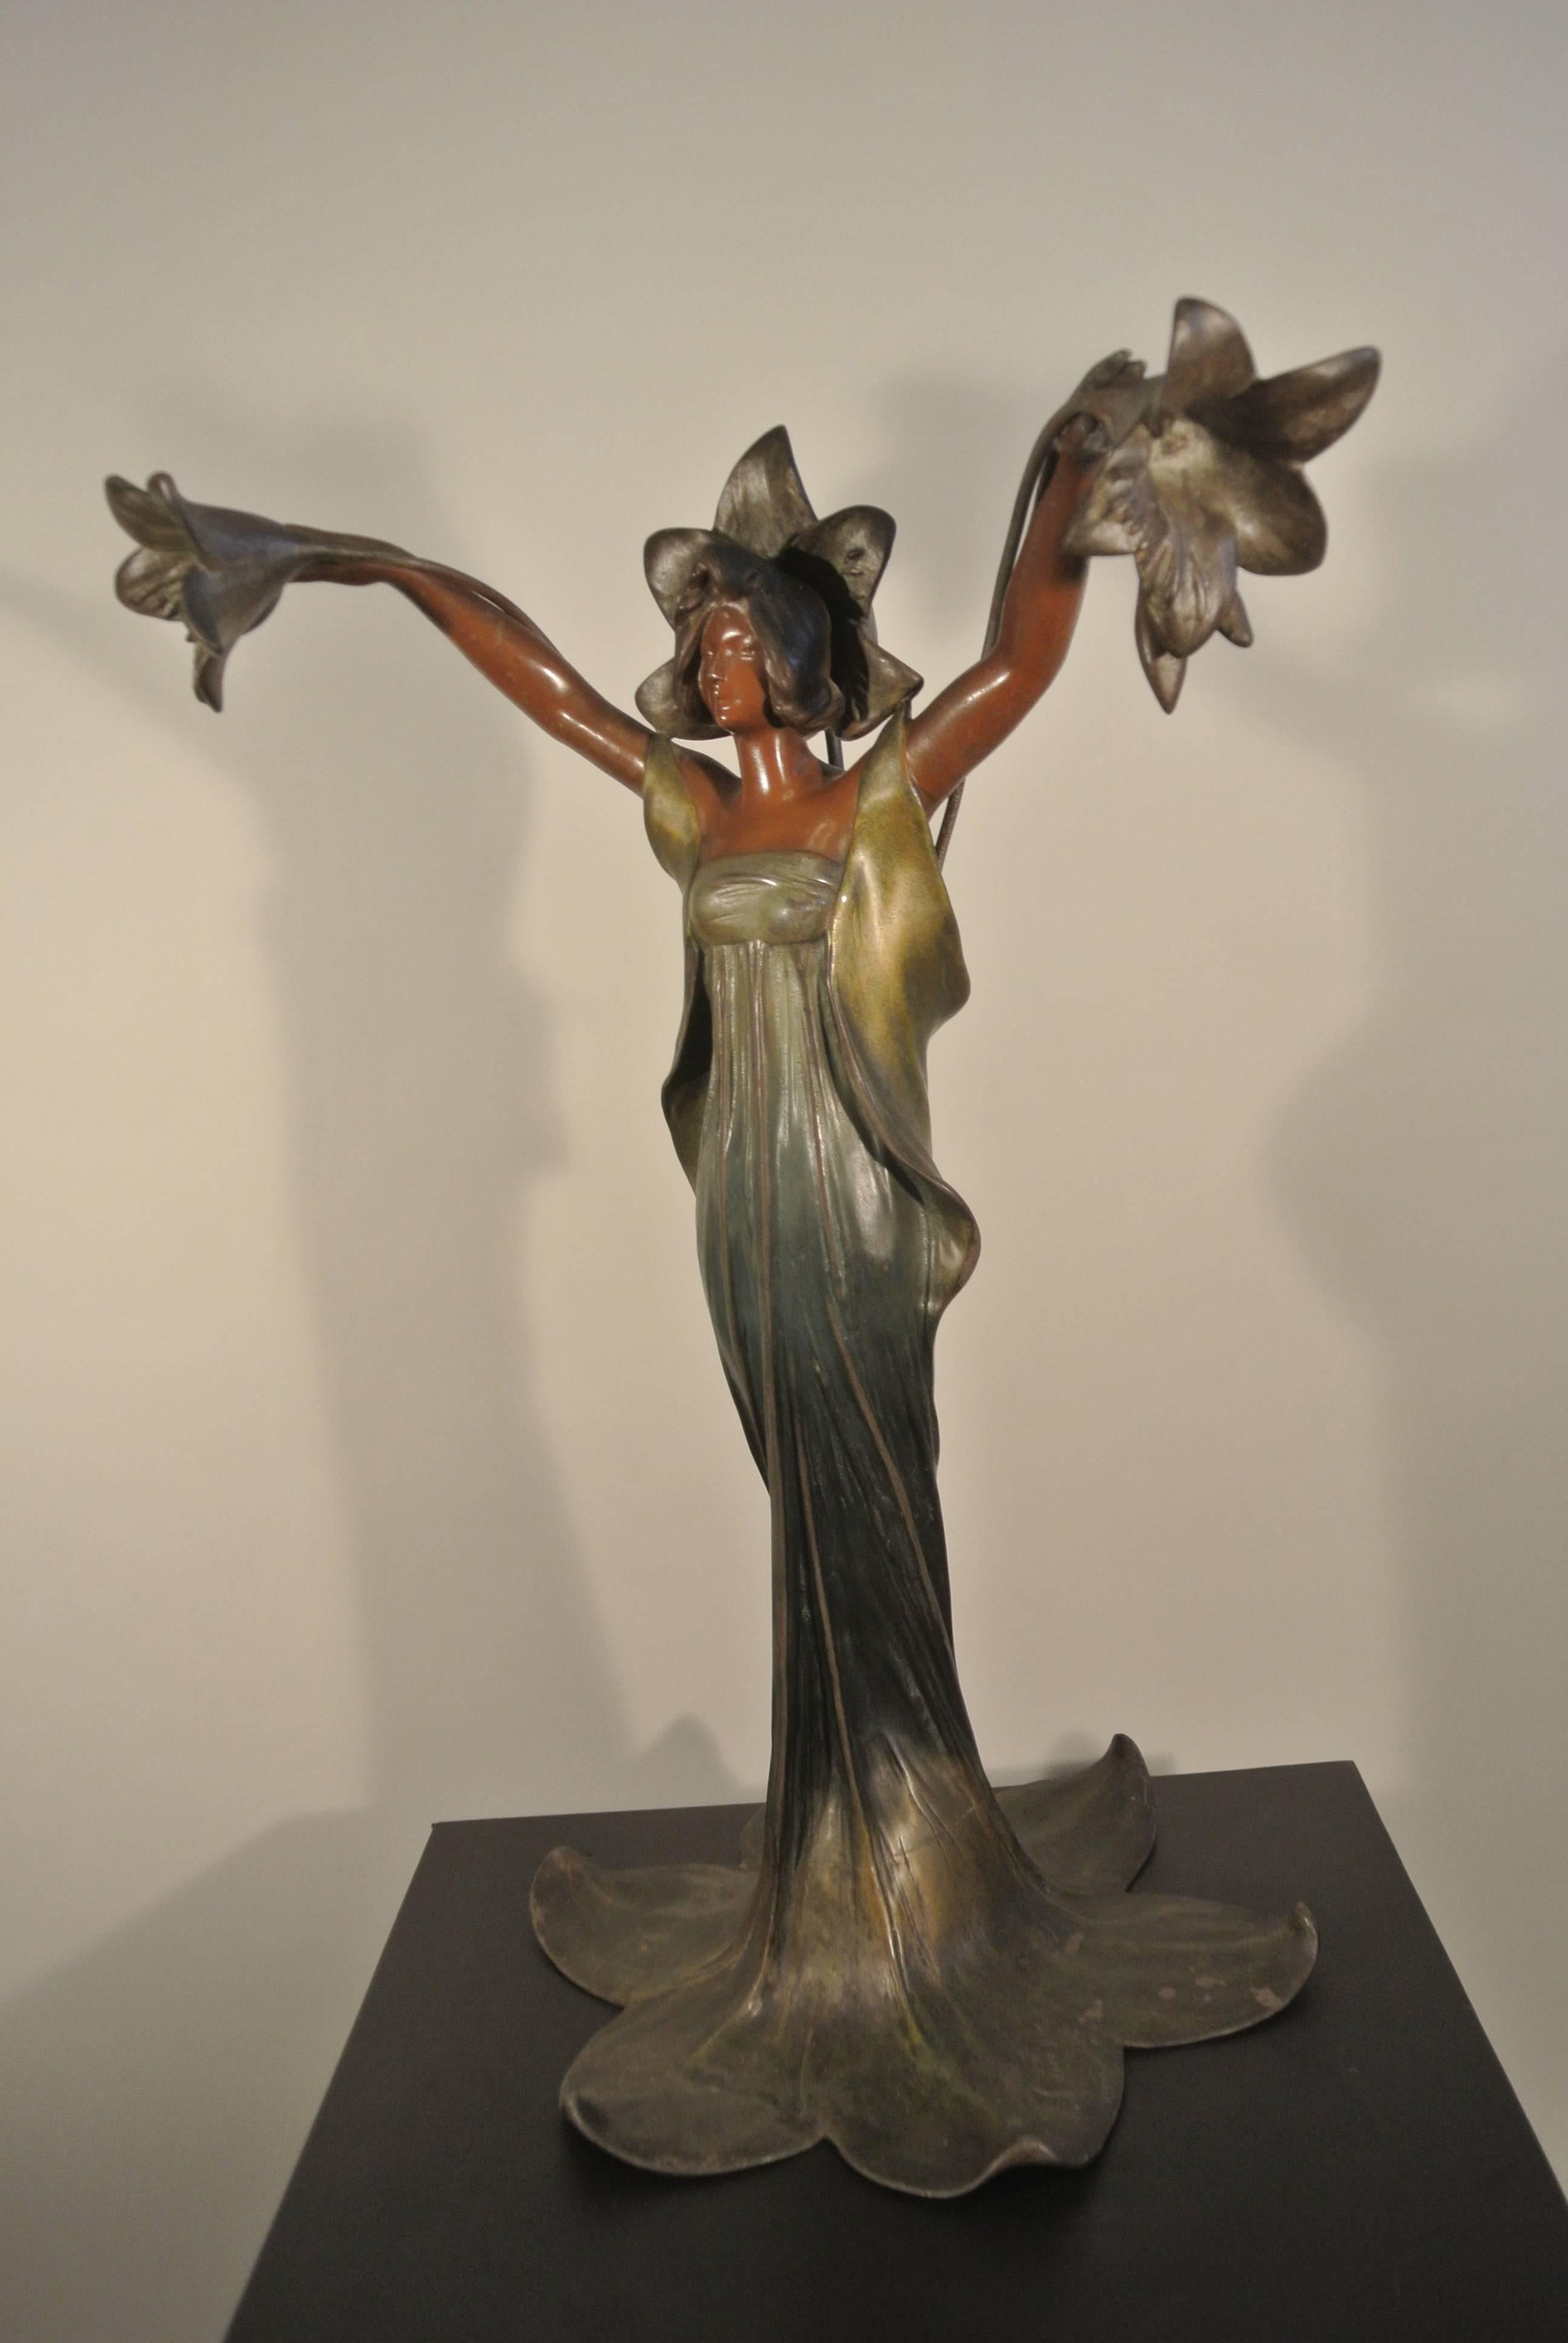 20th Century In Cold Painted Metal, 'Lady of Lilies' Signed J. Causse, circa 1900